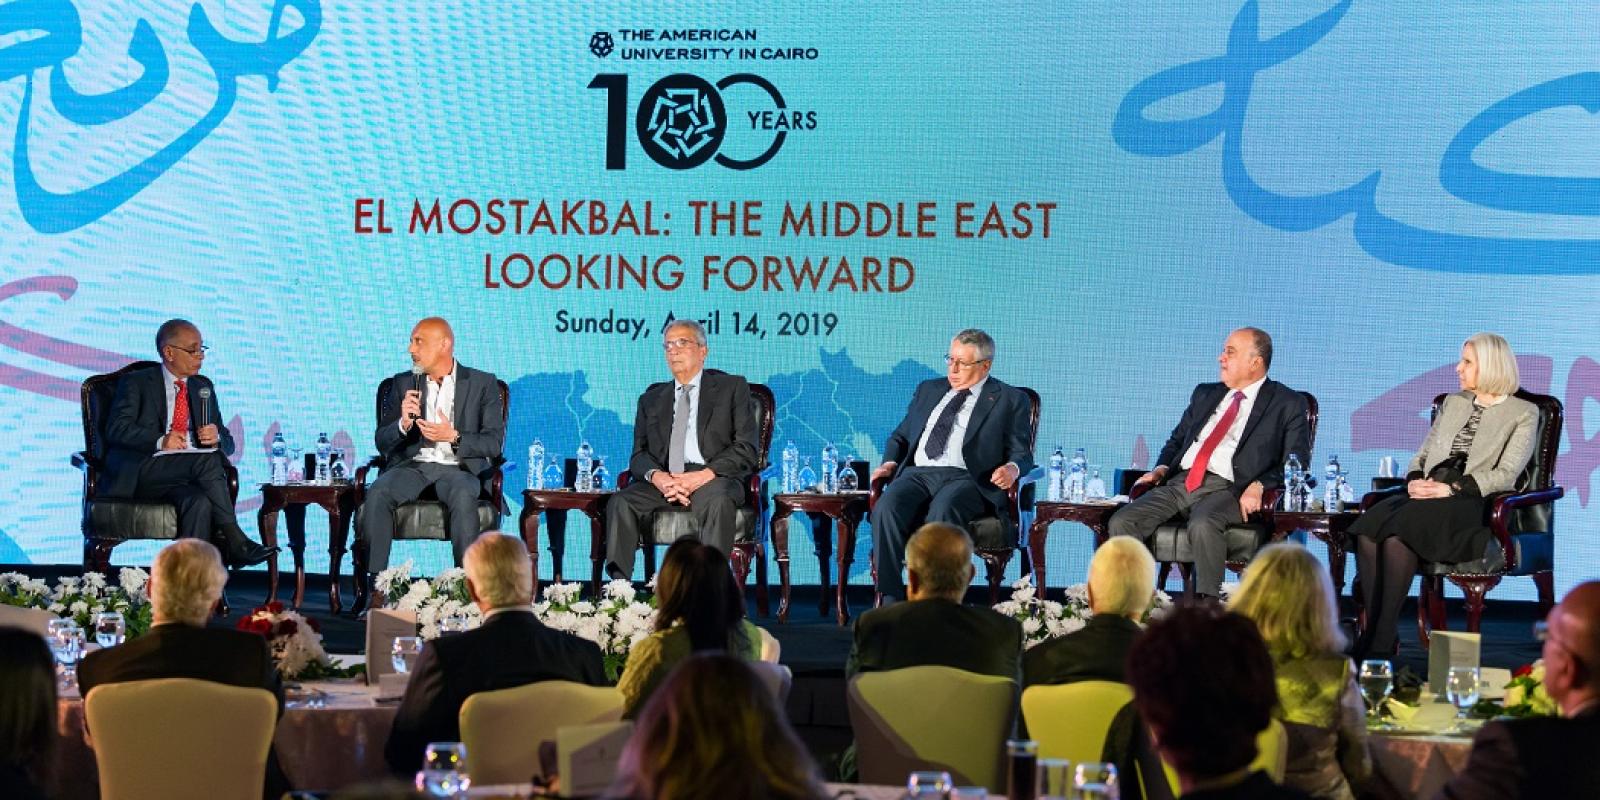 AUC Launches El Mostakbal: the Middle East Looking Forward Initiative